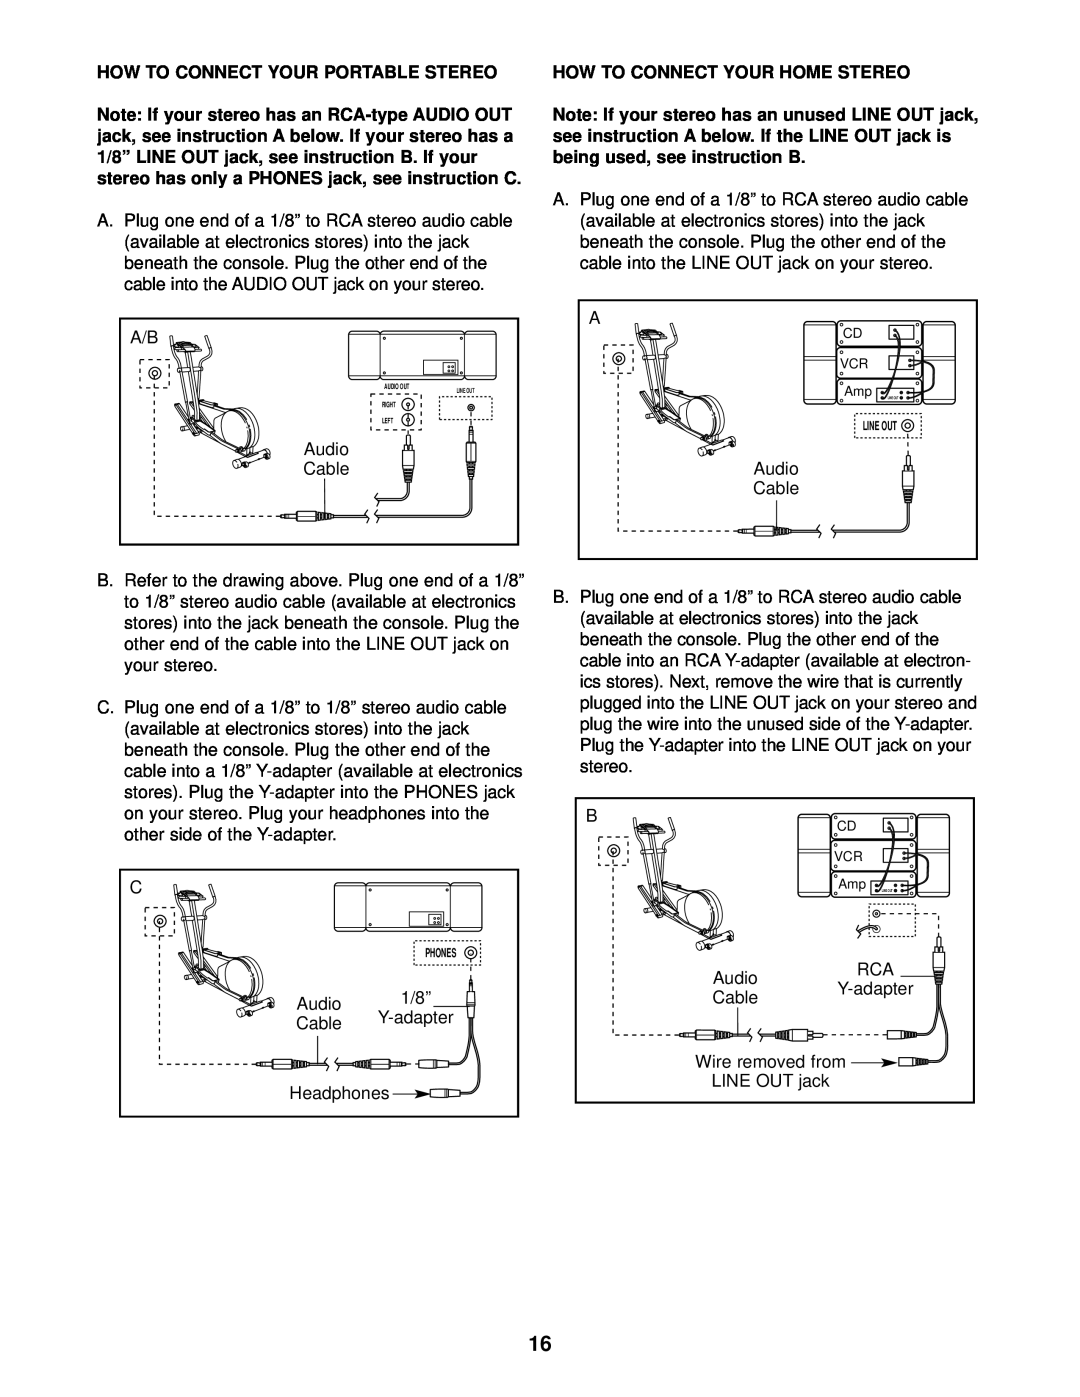 ProForm 831.285284 user manual How To Connect Your Portable Stereo, Audio, Cable, How To Connect Your Home Stereo 